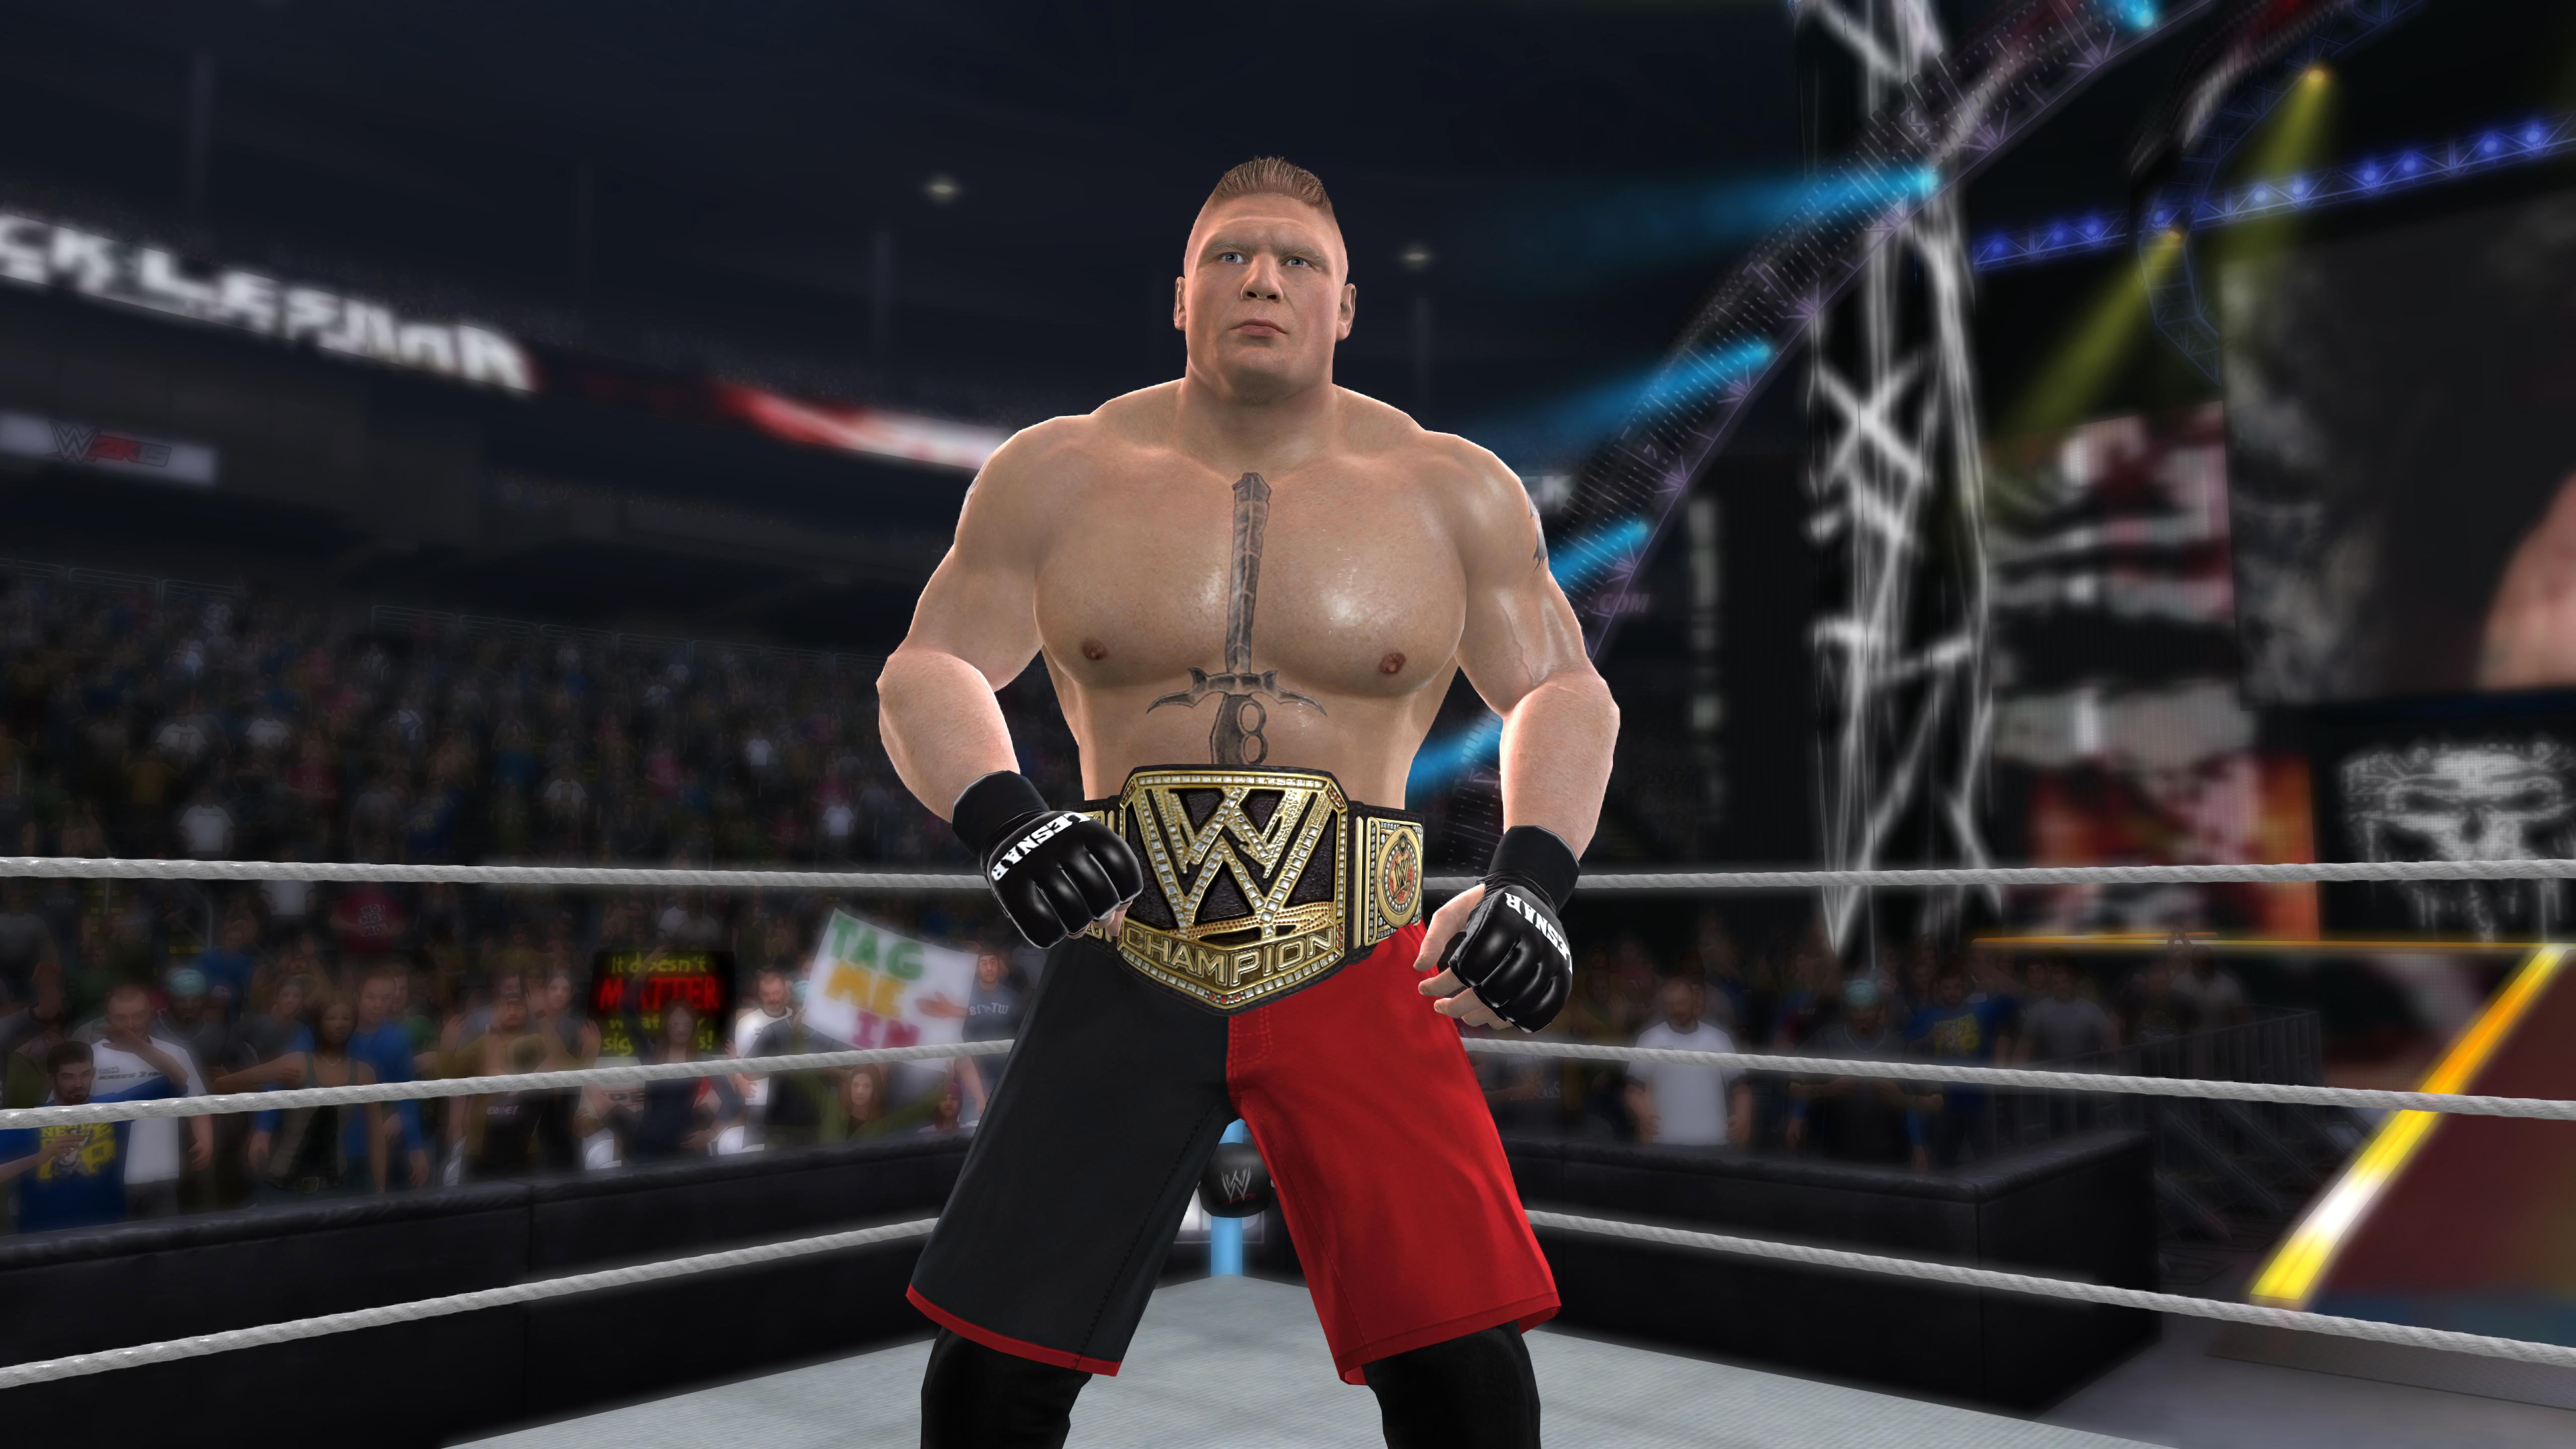 Wwe 2k15 game for mobile game